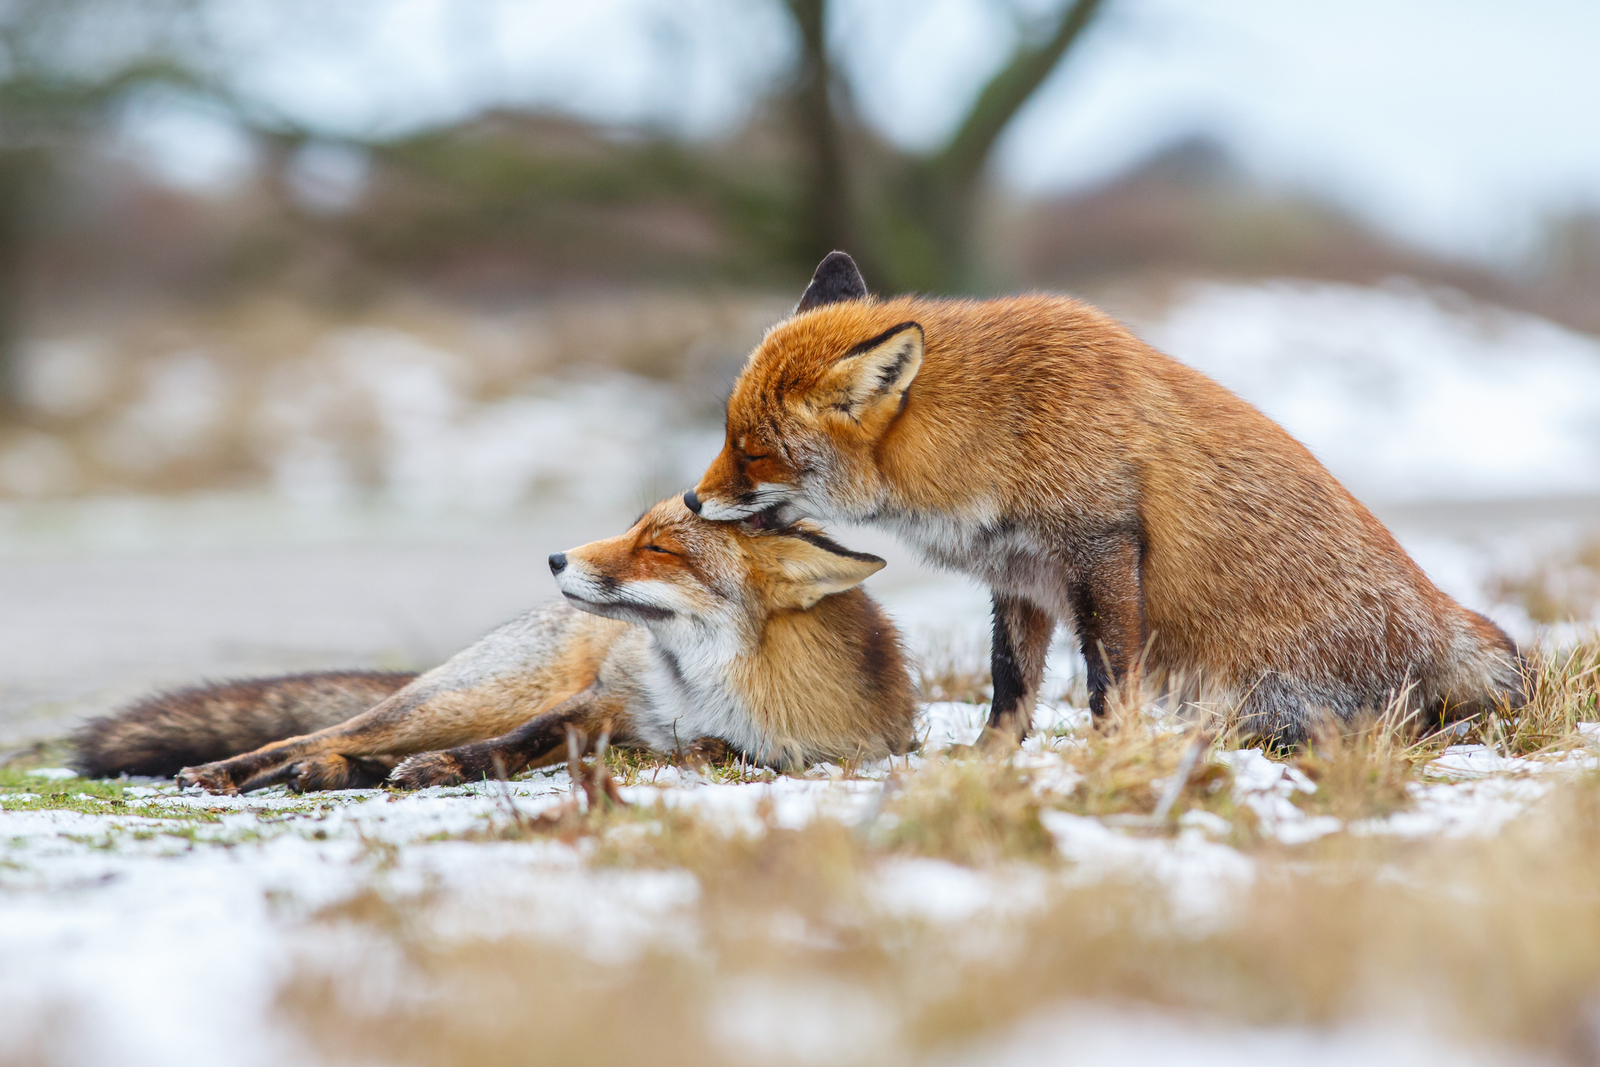 Two red foxes in a winter setting. Image Credit: © 12qwerty | Dreamstime.com.